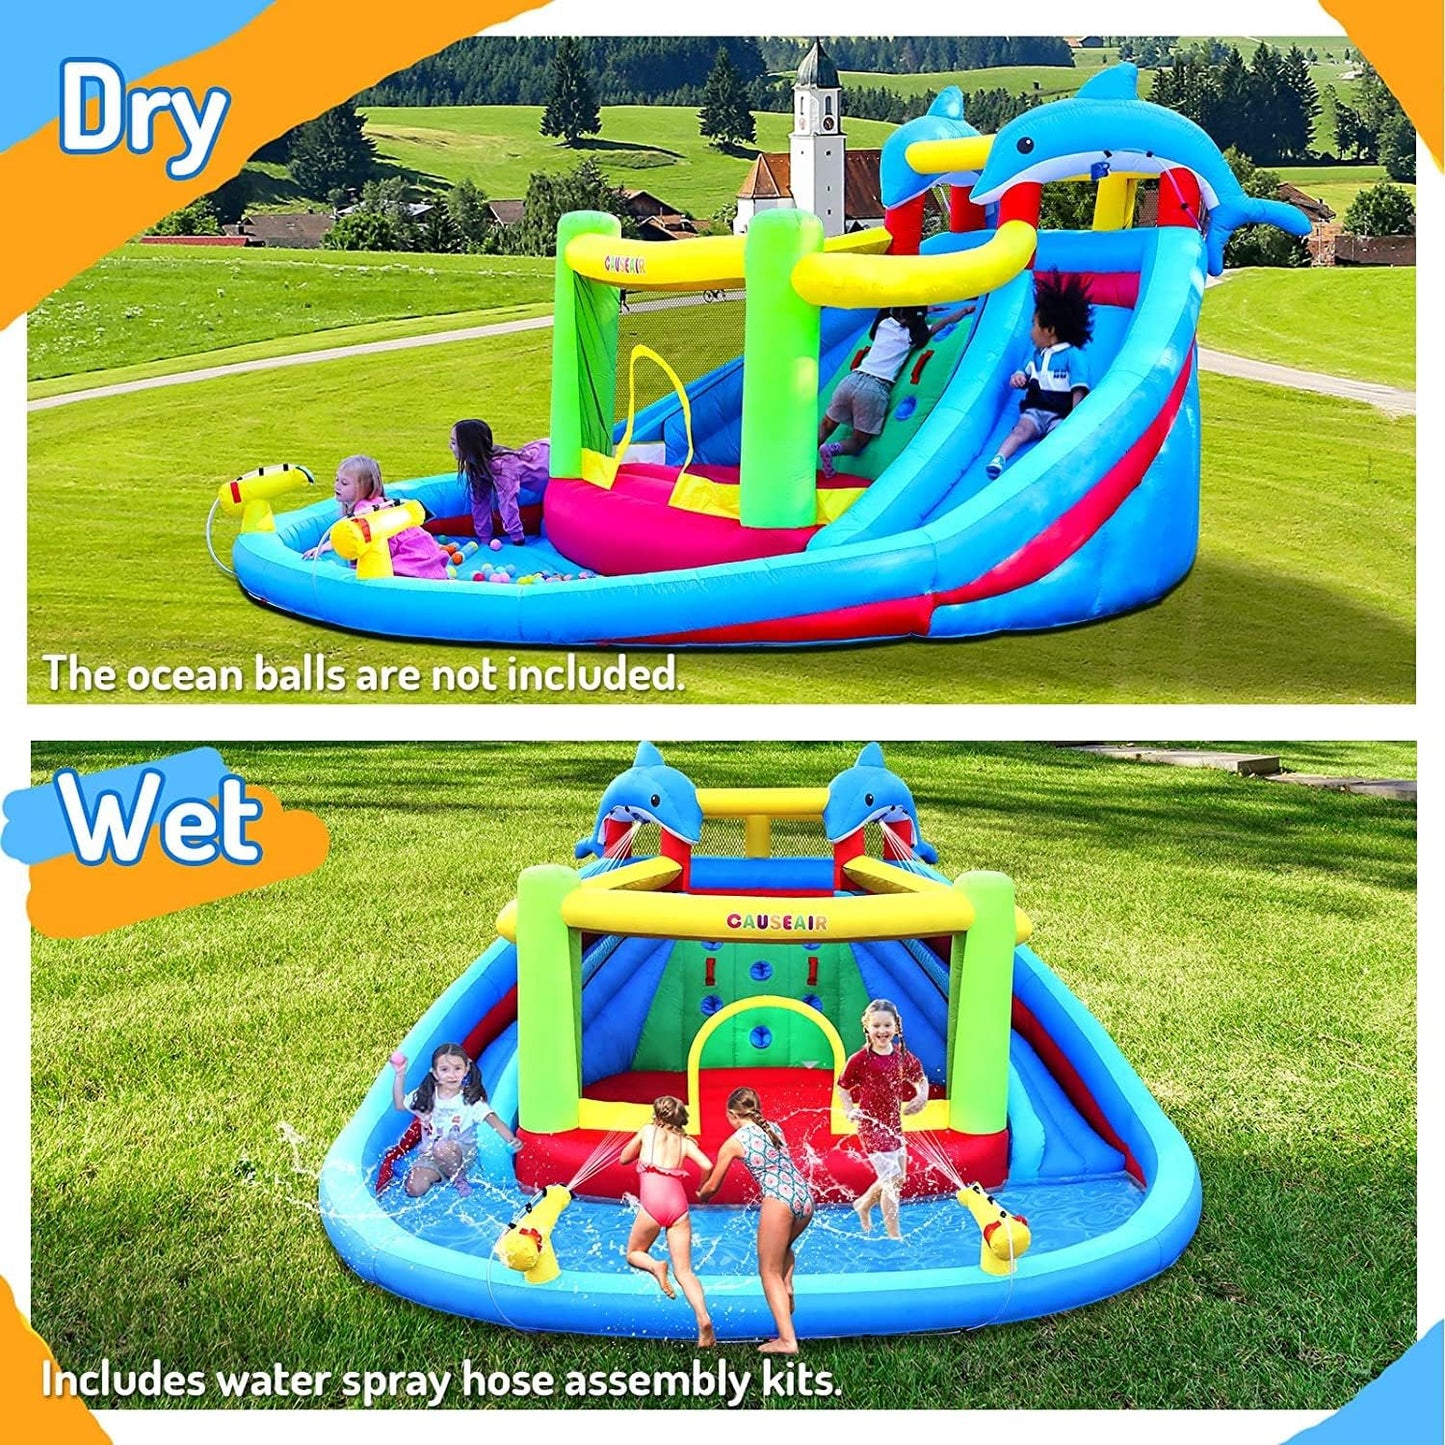 Inflatable Water Slide with Bounce House,Dolphin Styling,Splashing Pool,Double Water Cannon,Climbing Wall,Heavy Duty GFCI Blower,Inflatable Water Park for Kids Backyard Summer